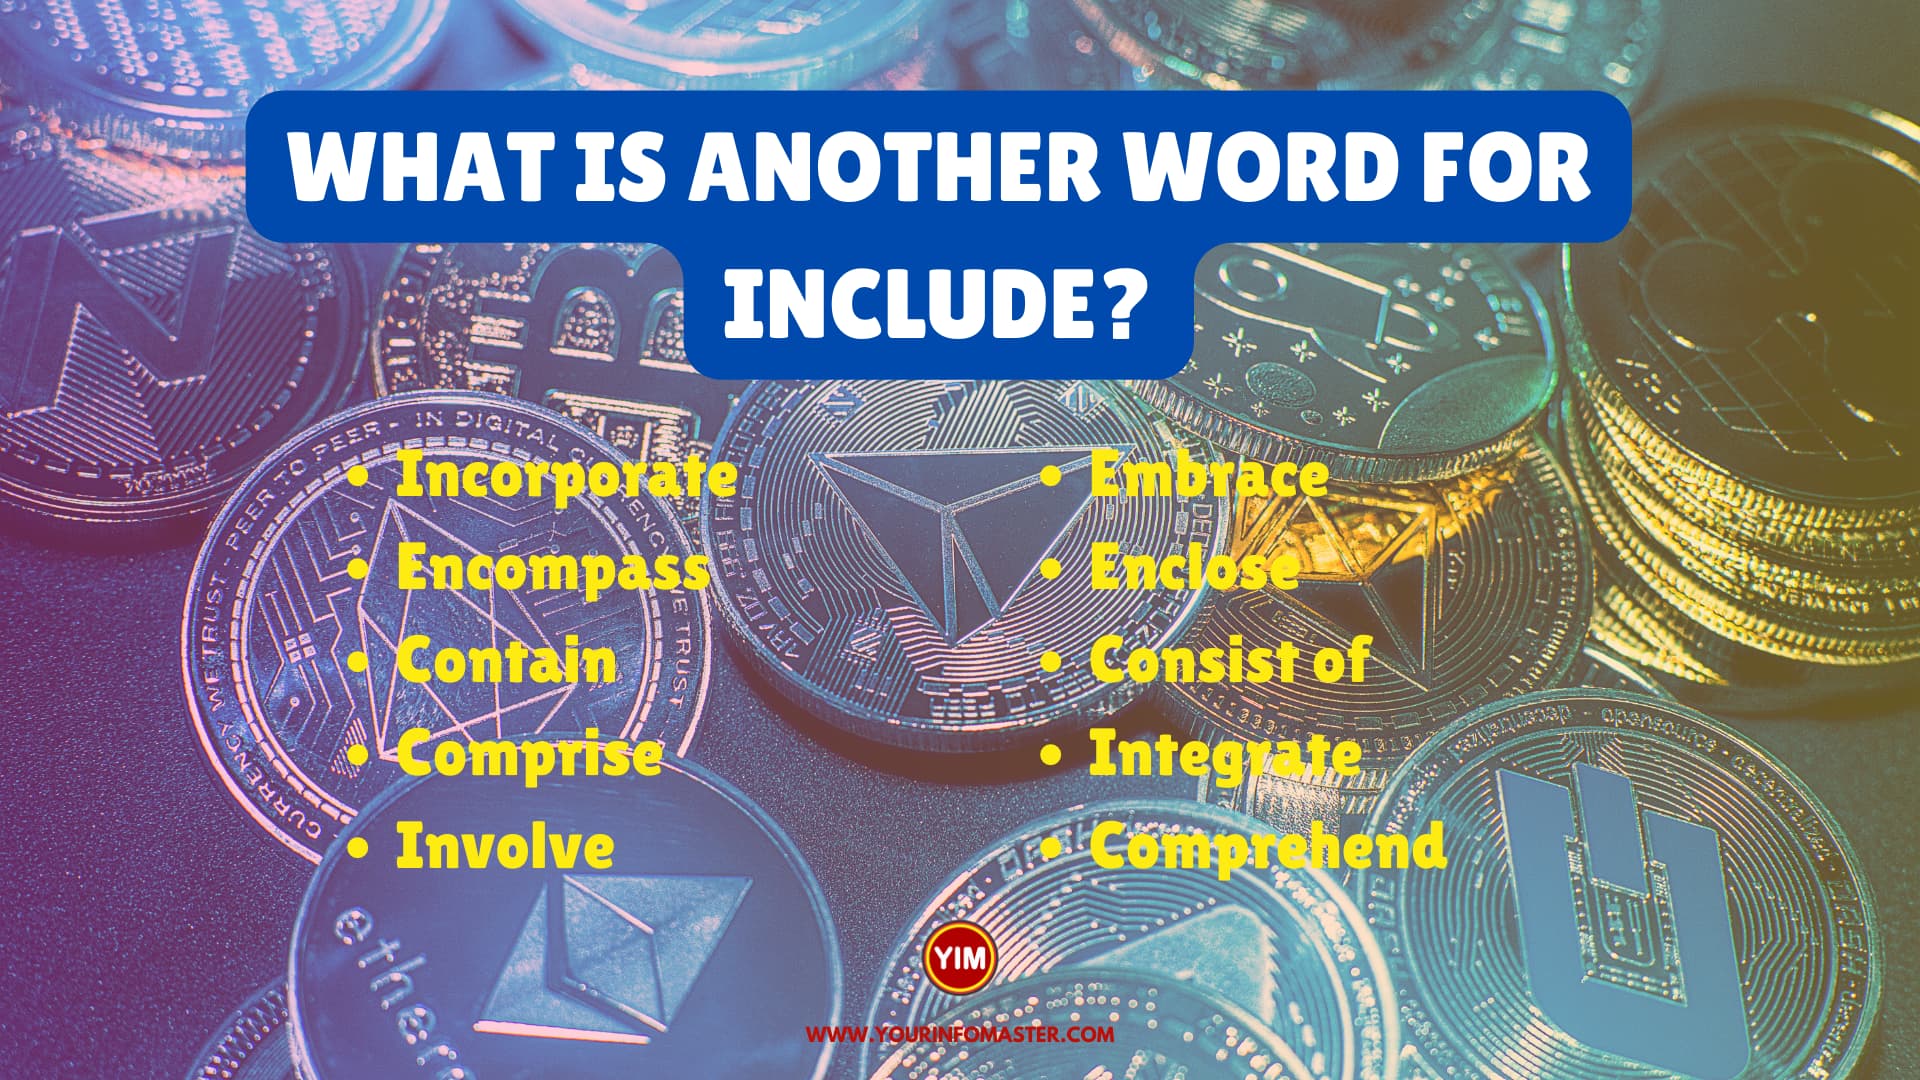 What is another word for Include